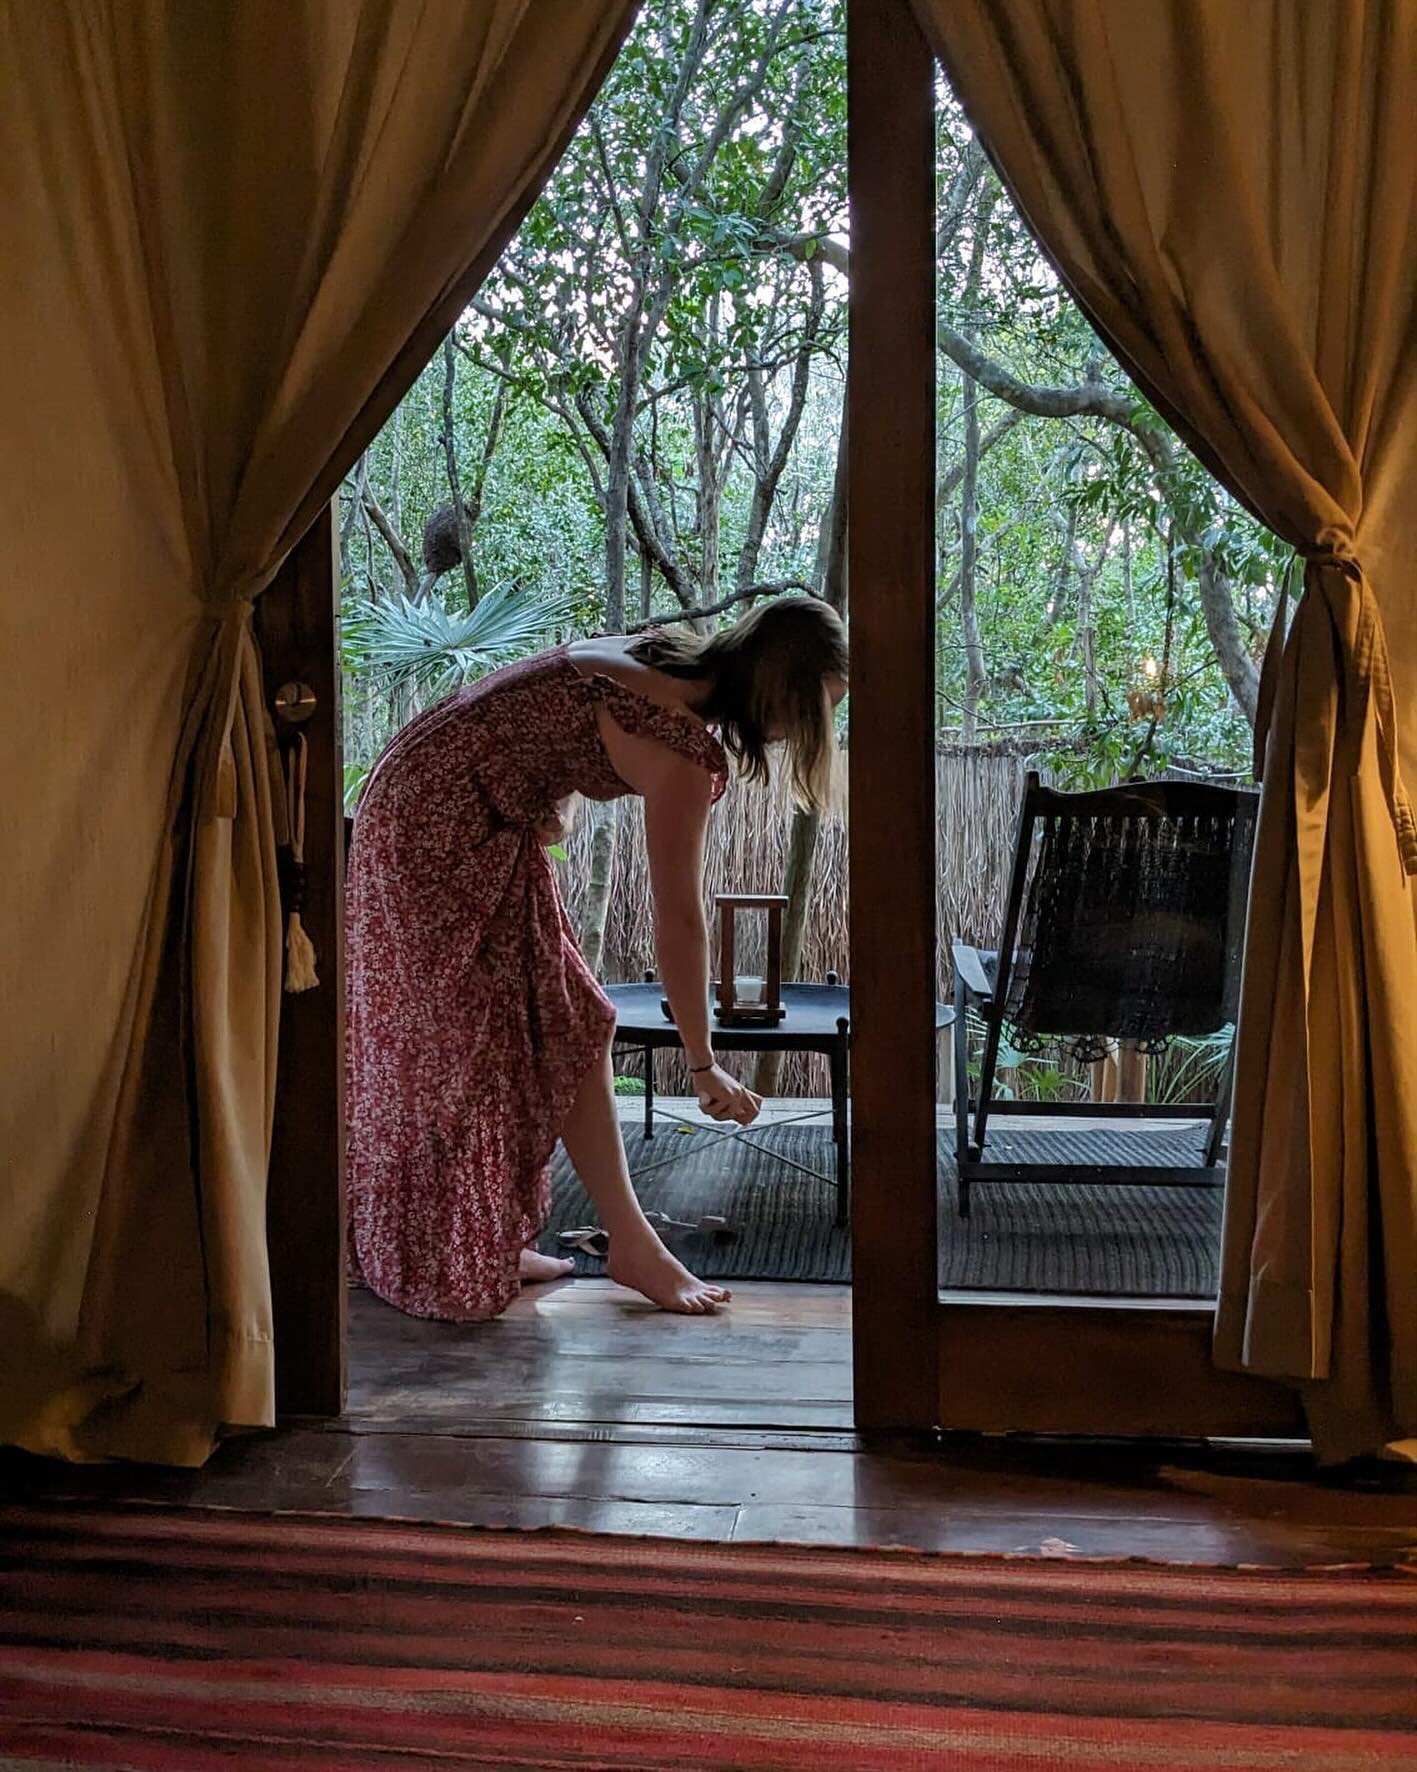 My husband caught me looking elegant last week, on vacation. When he sent me the photo, I just stared at it. I am rarely elegant in this season of life with young kids. I rarely have the time to get completely ready, let alone put on a beautiful dres